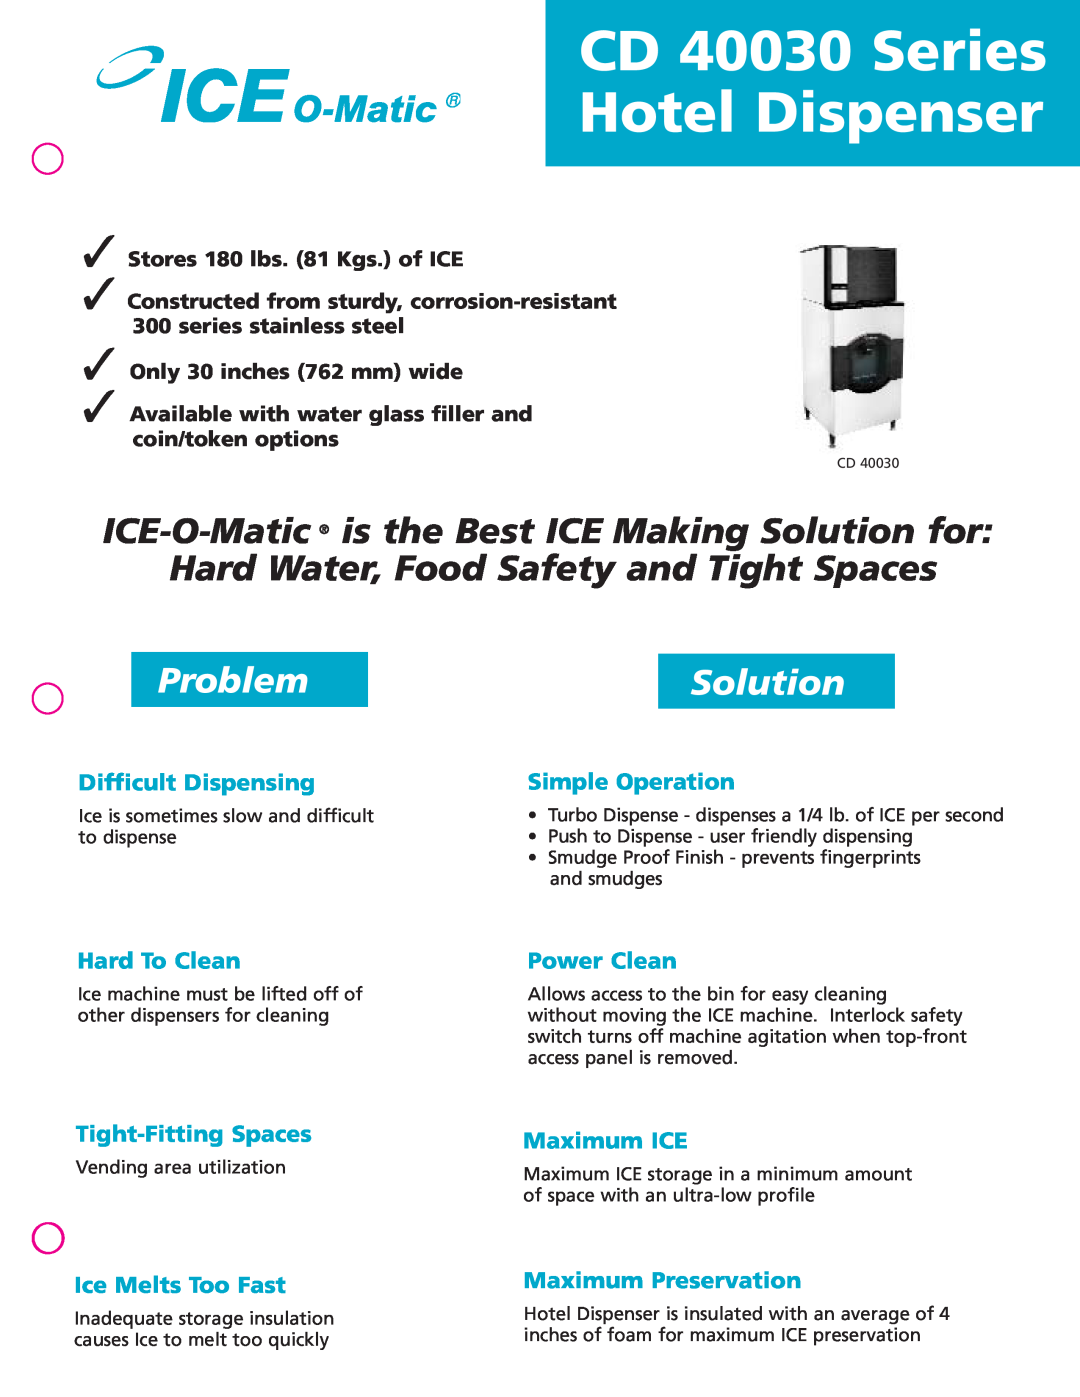 Ice-O-Matic CD 40030 Series manual Hotel Dispenser, Problem, Solution, Difficult Dispensing, Simple Operation, Power Clean 